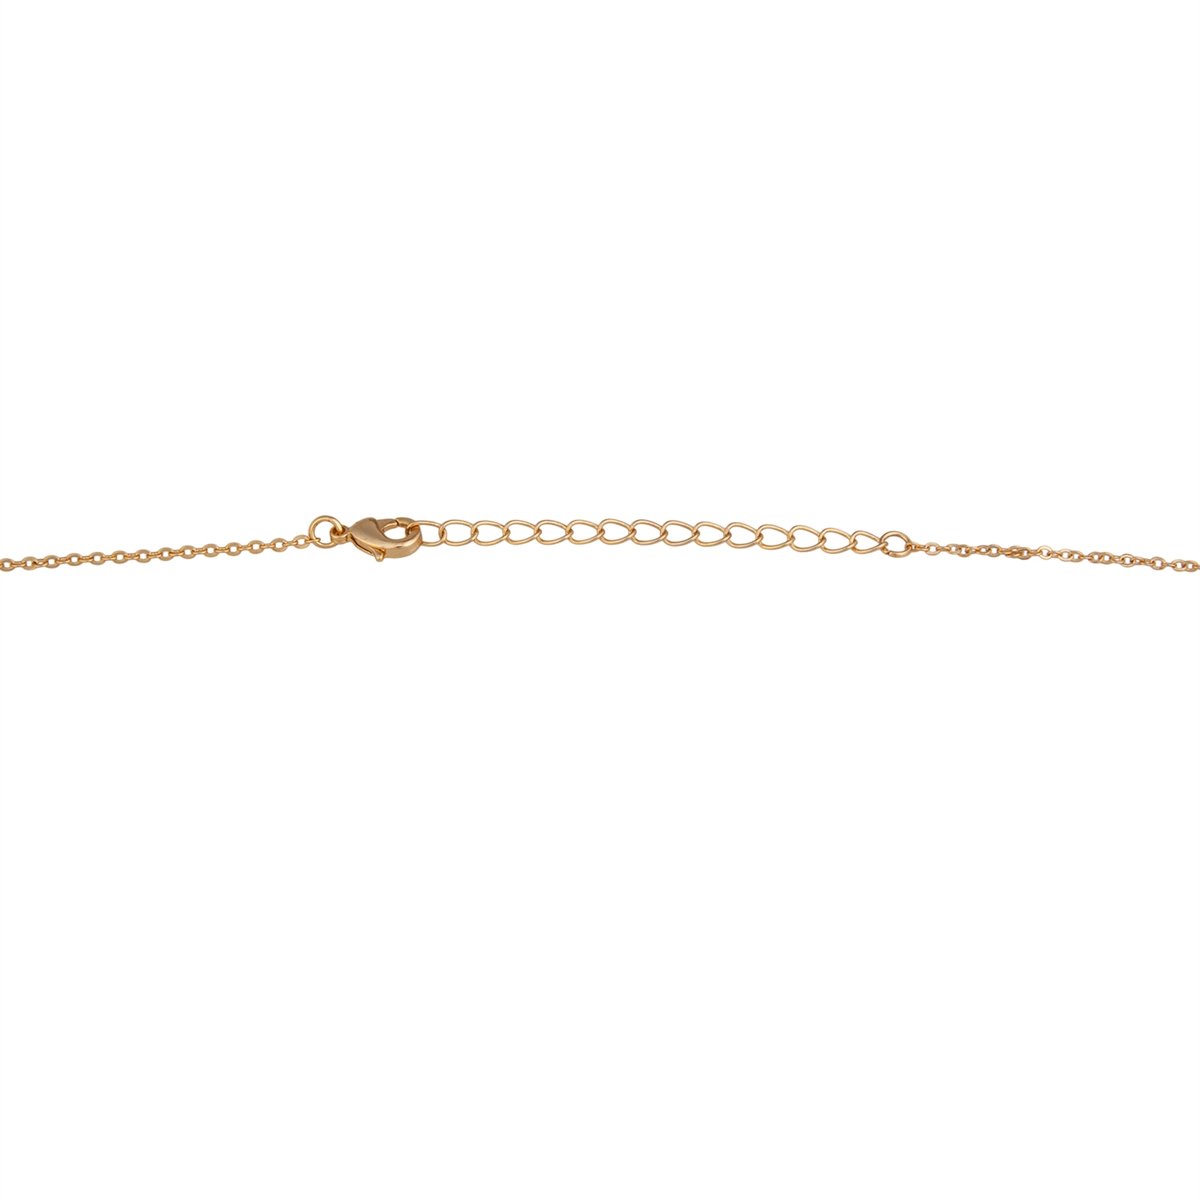 Charles Albert Jewelry - Thin Gold Tone Base Metal Chain - 17in + 3in Extender - Clasp Up Close